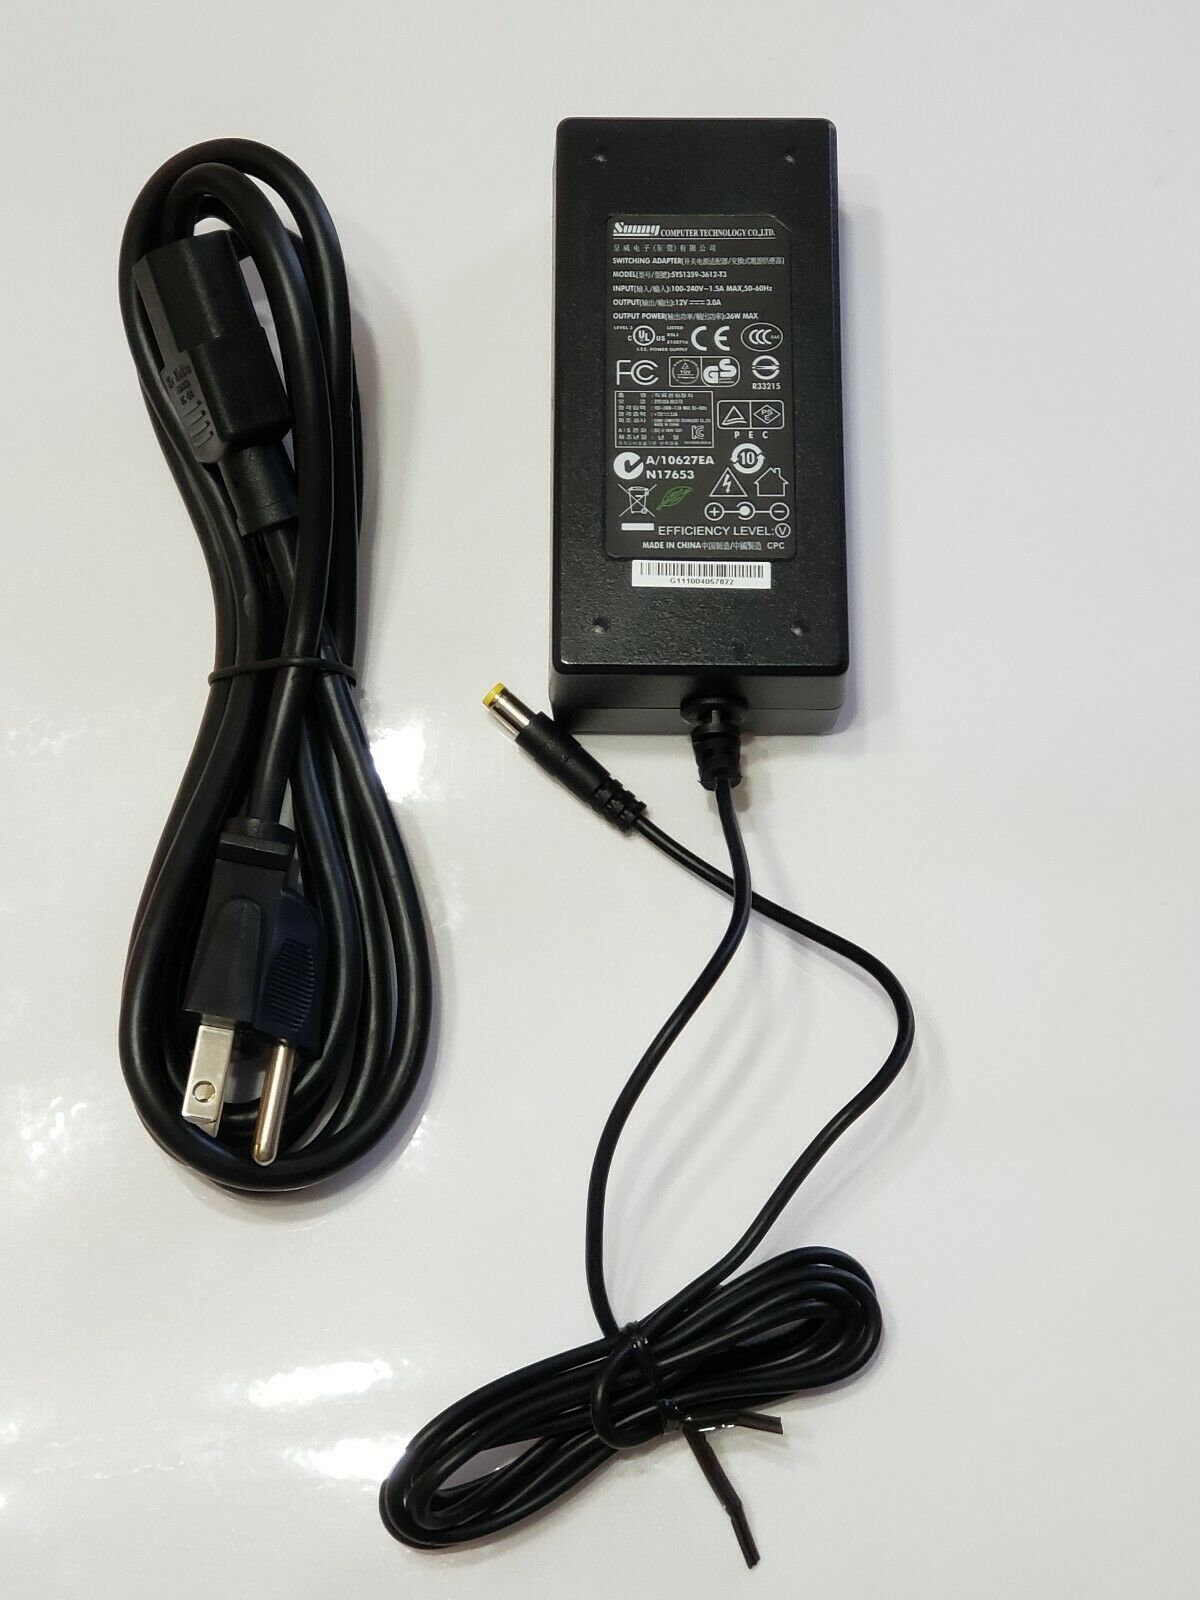 NEW SUNNY POWER ADAPTER SYS1546-3612-T3 12VDC 3A Power Supply 5.5*2.1mm